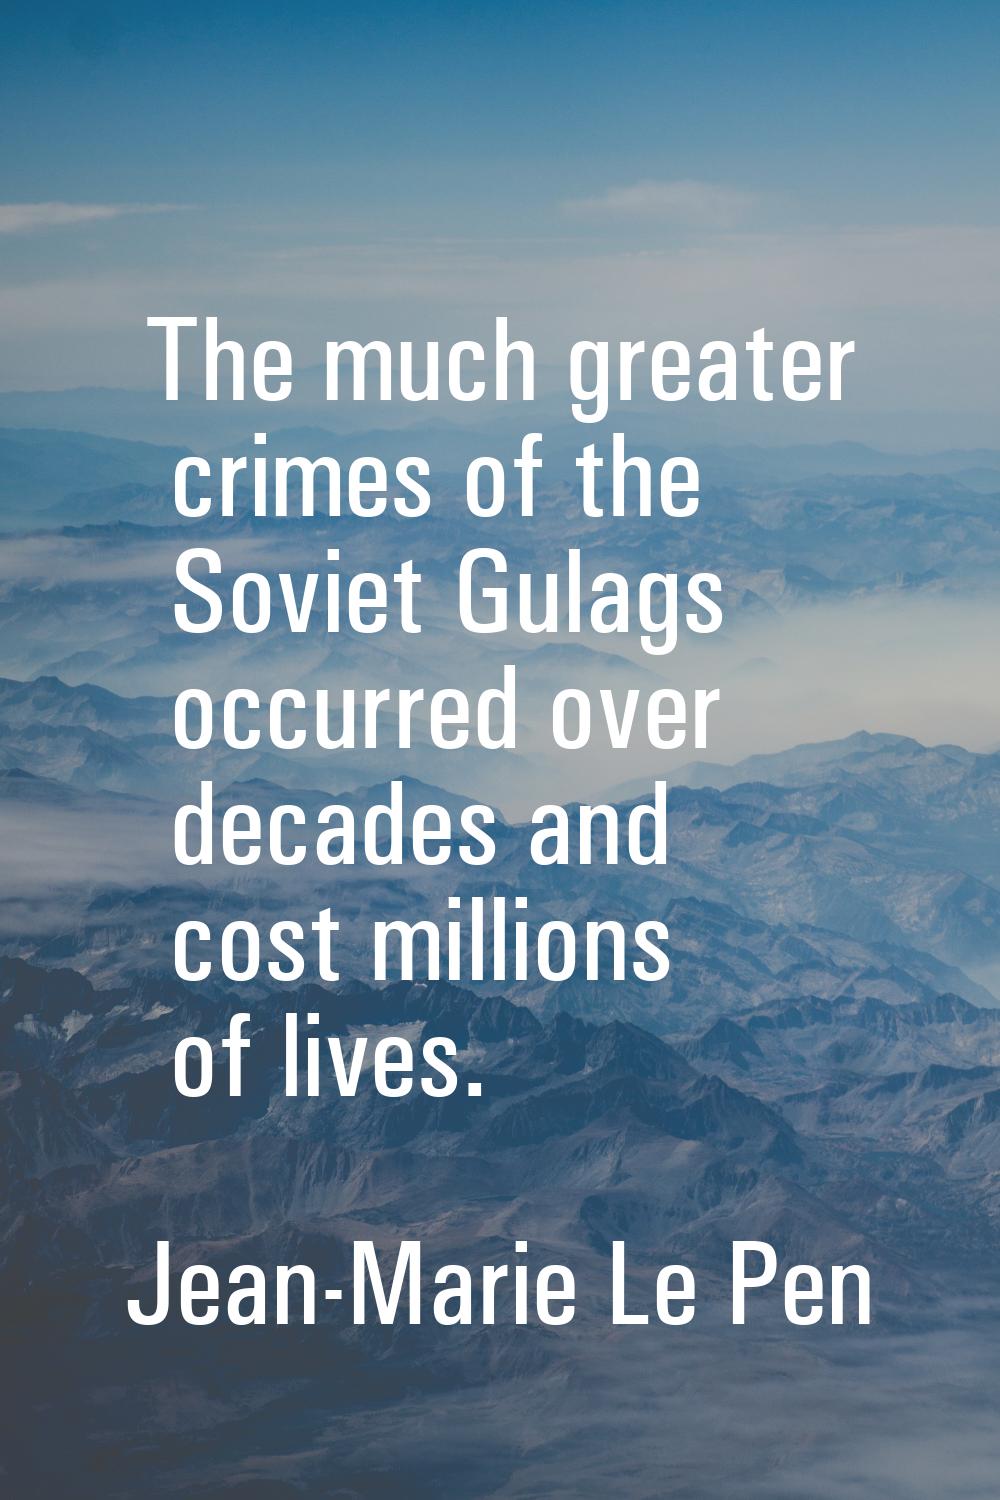 The much greater crimes of the Soviet Gulags occurred over decades and cost millions of lives.